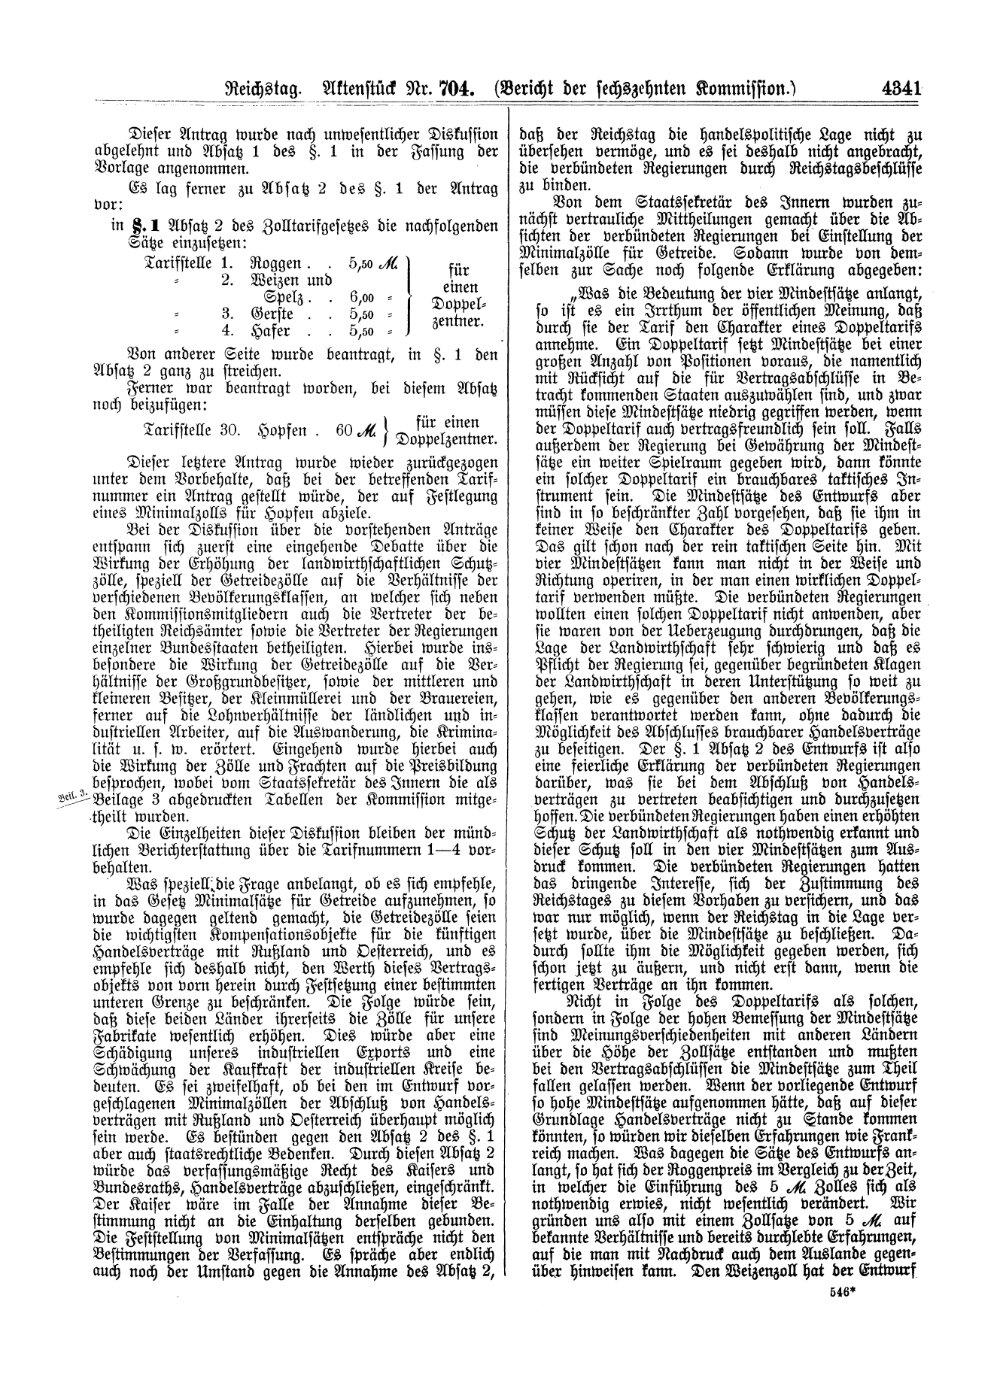 Scan of page 4341